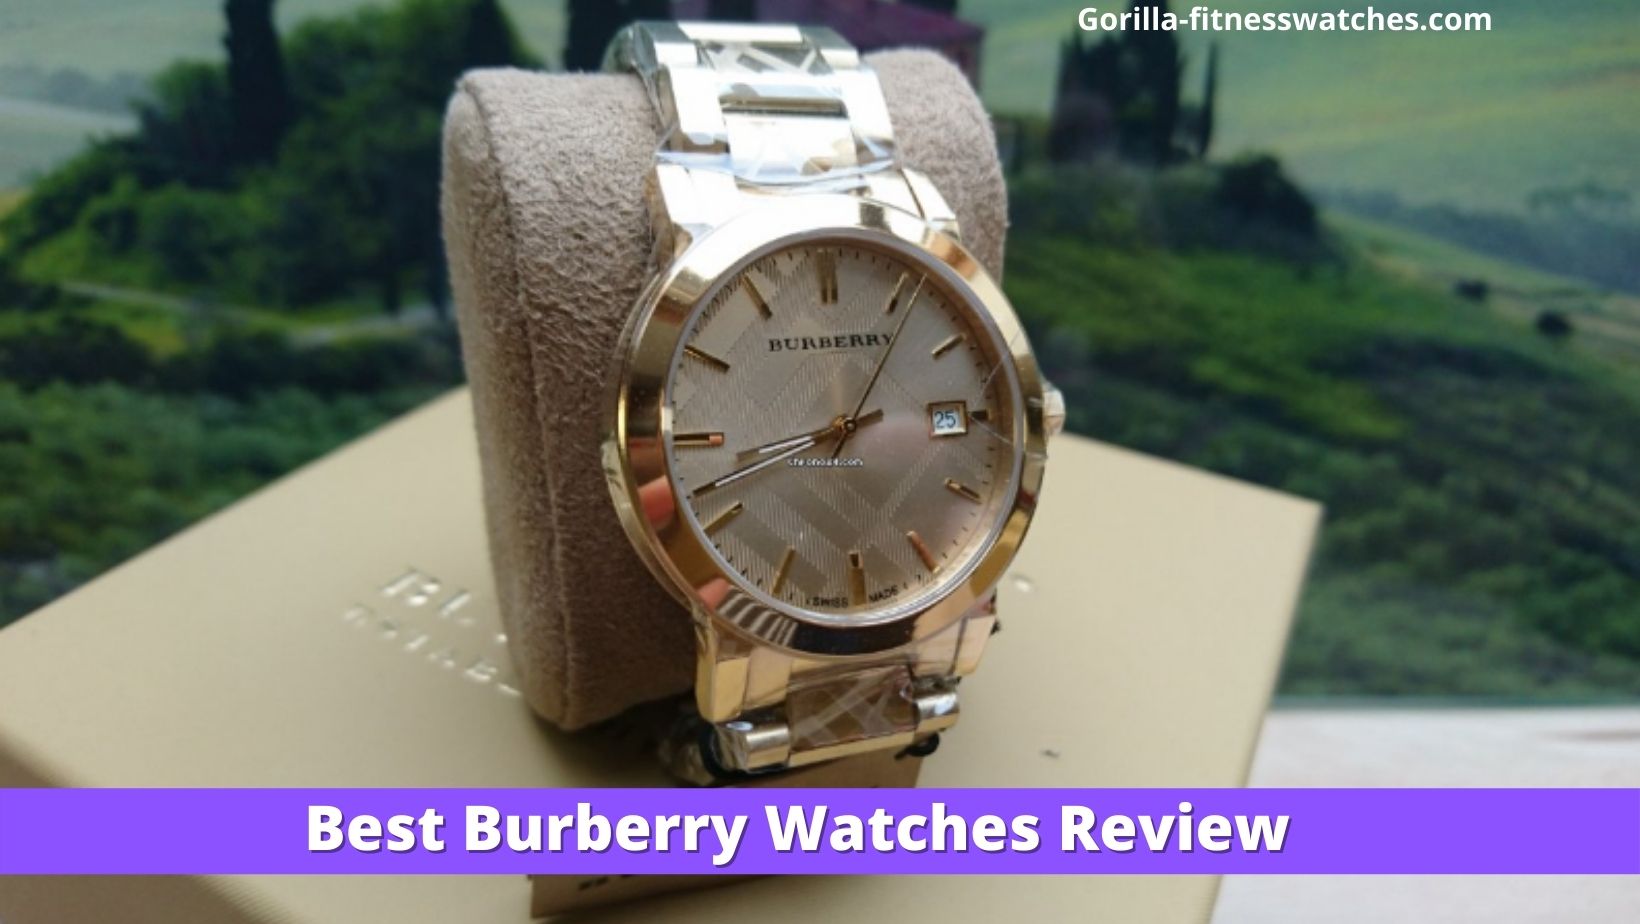 Best Burberry Watches Review